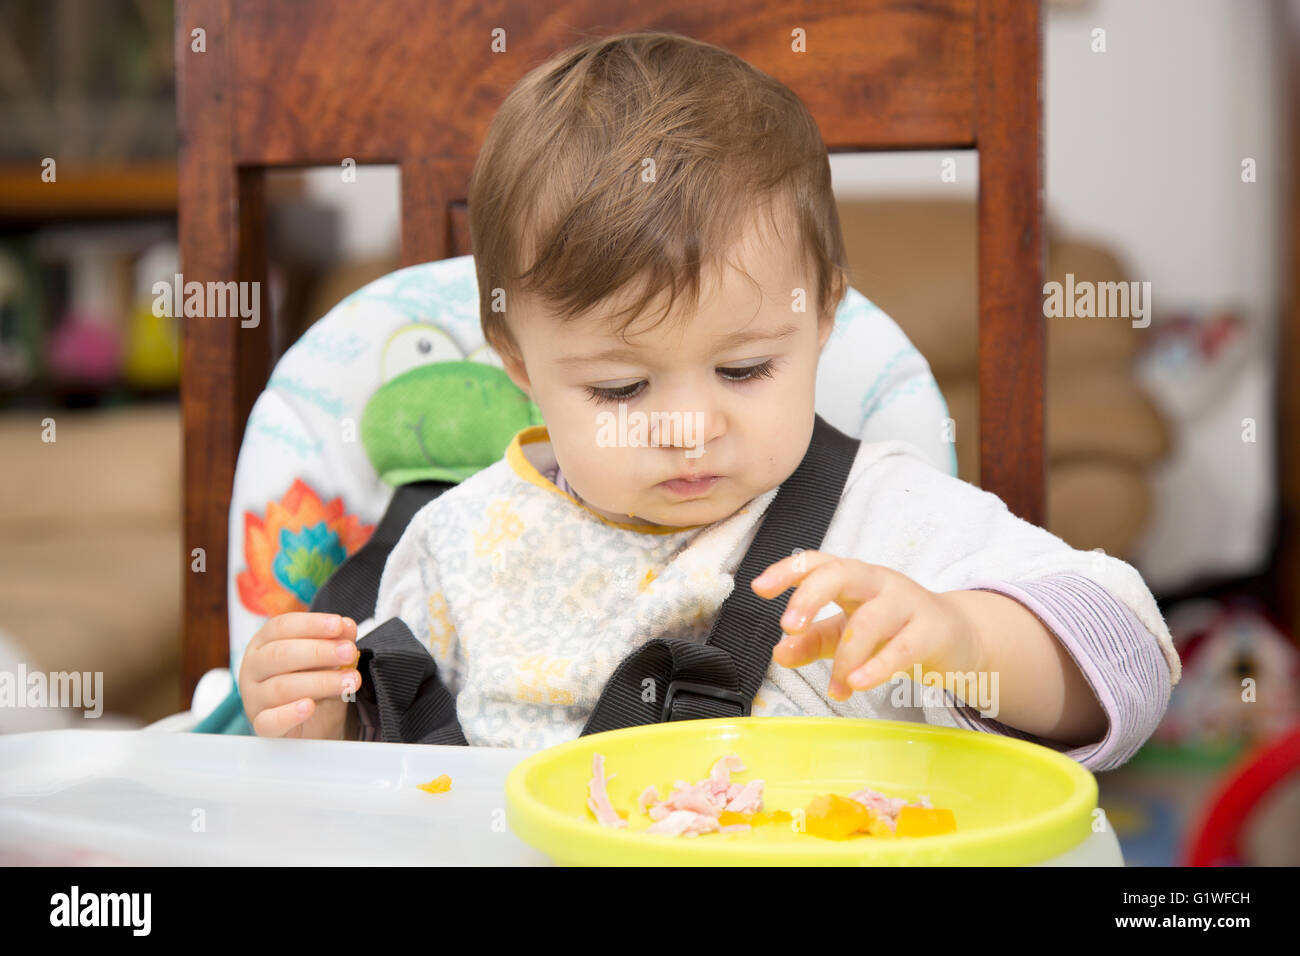 Portrait of little one year old baby at table eating food from a plate with hand Stock Photo